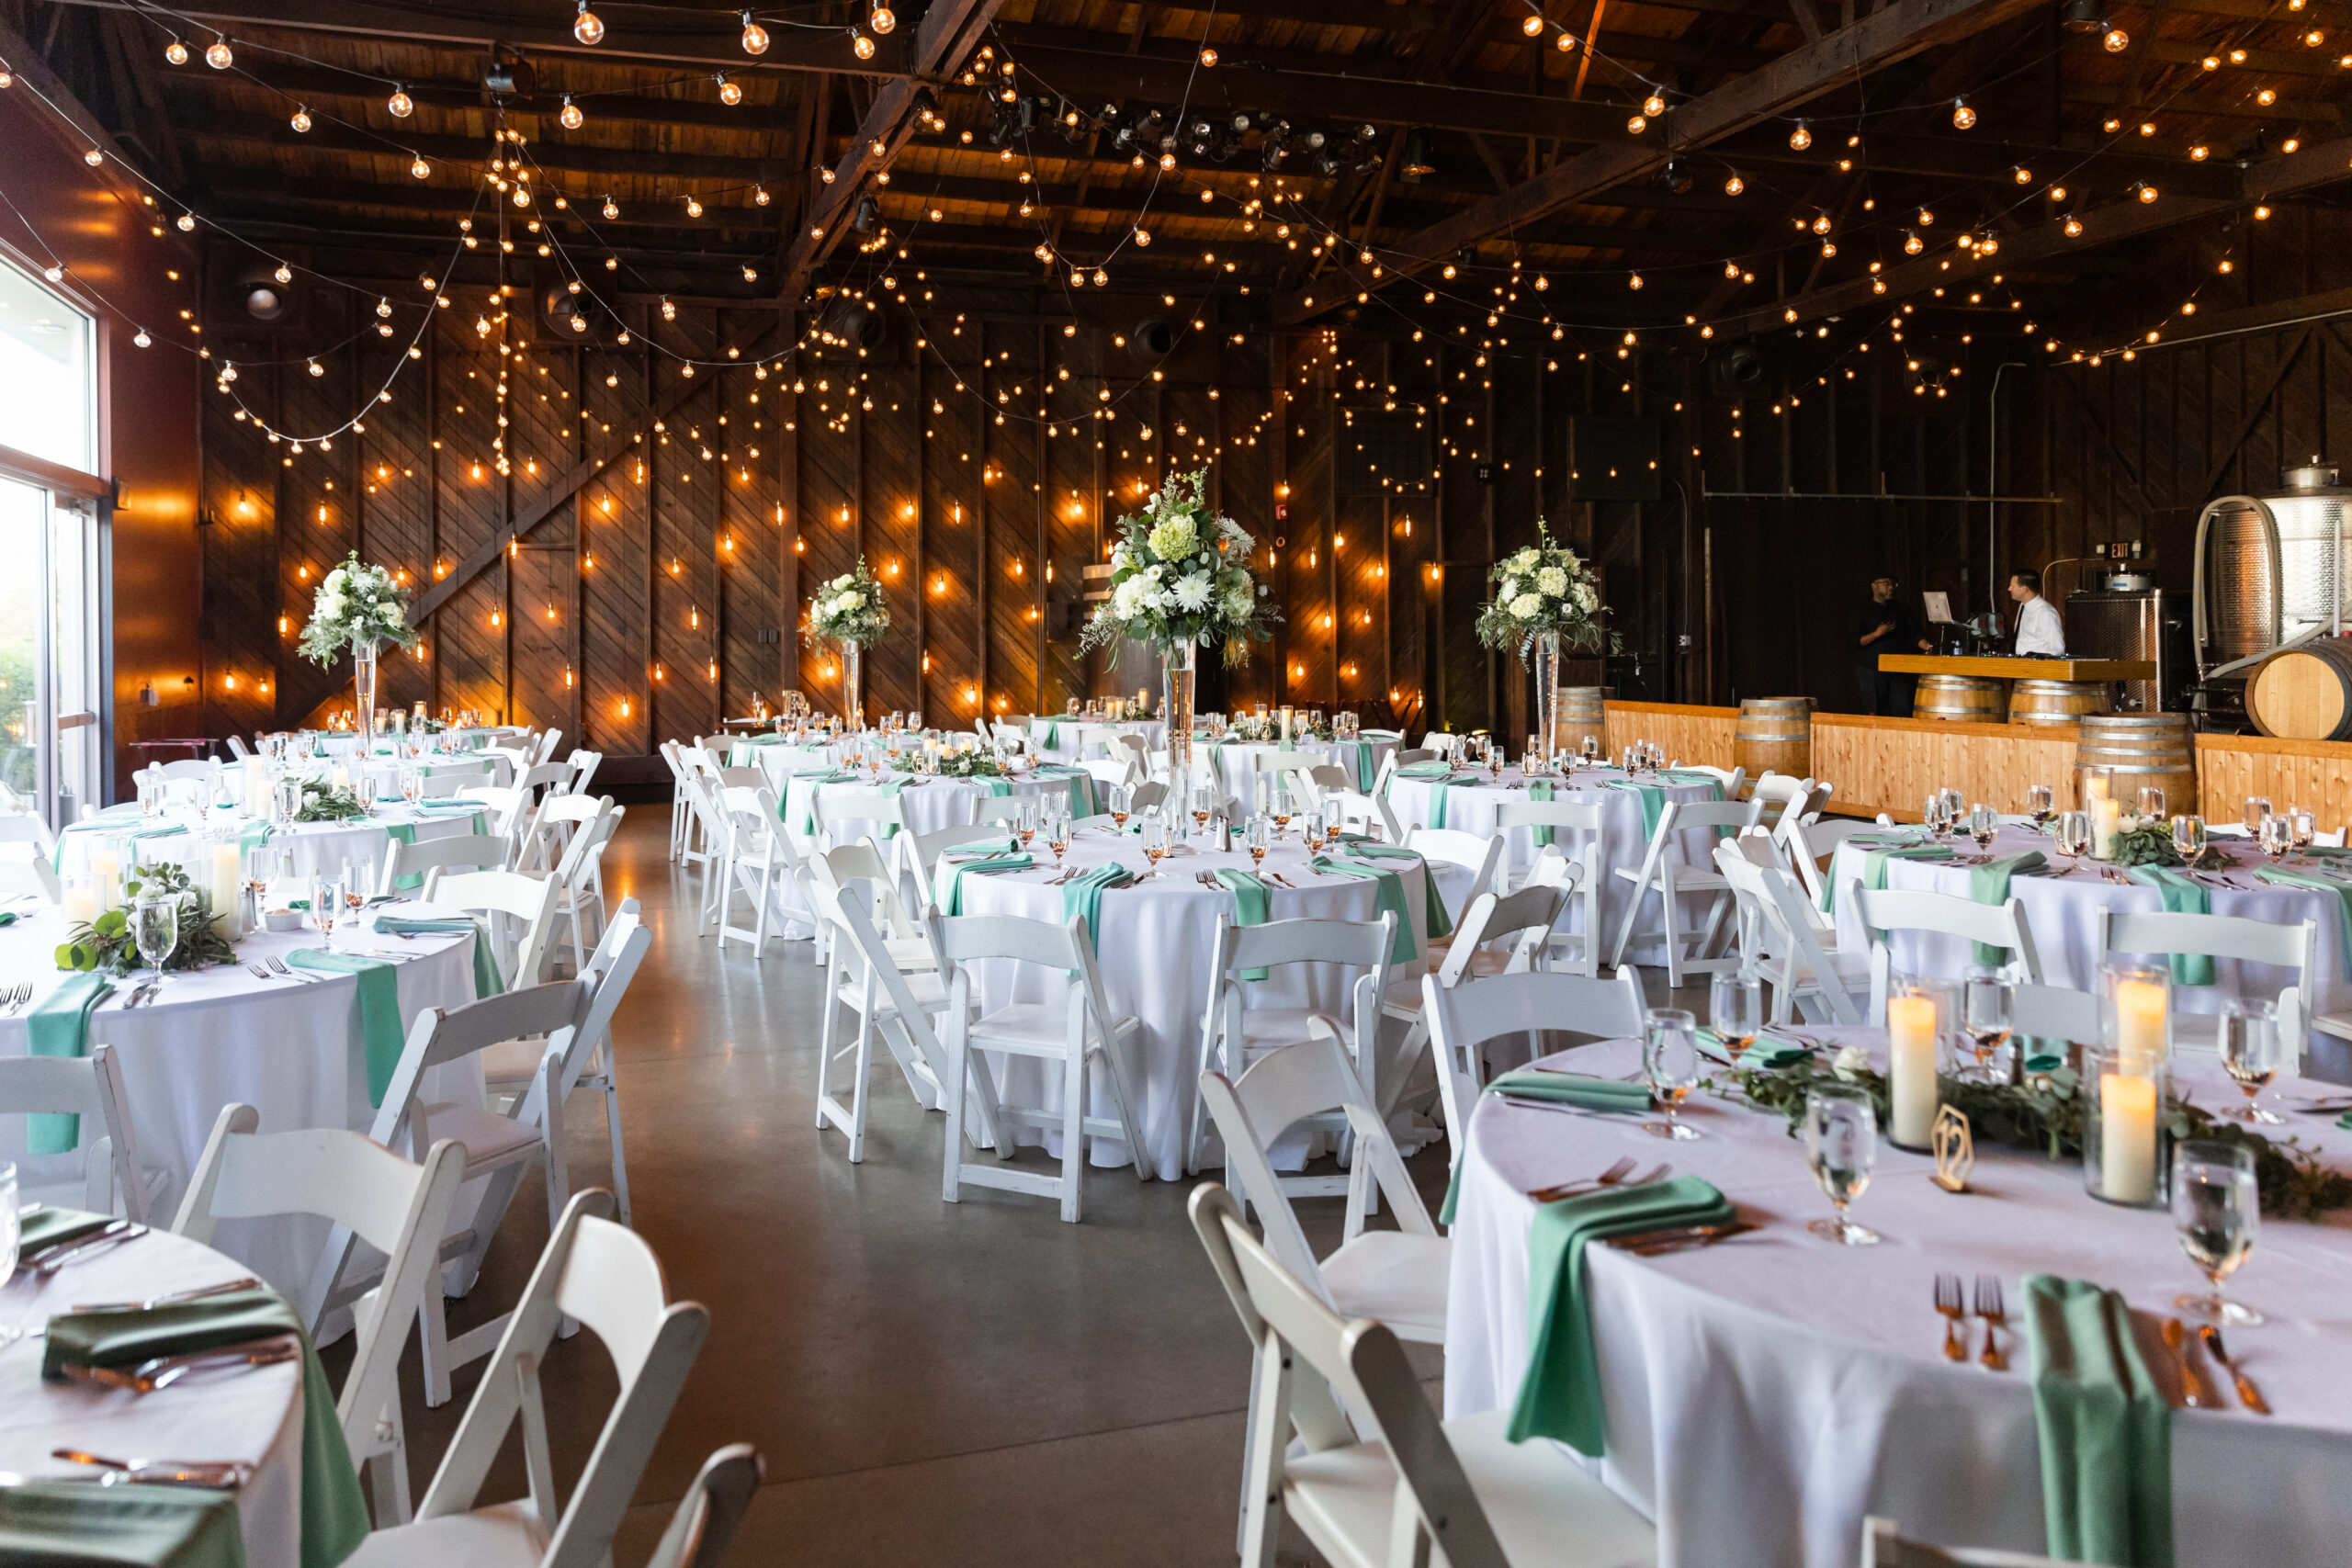 Salt Water Farm Vineyard offers a rustic chic event space for couples tying the knot in CT.